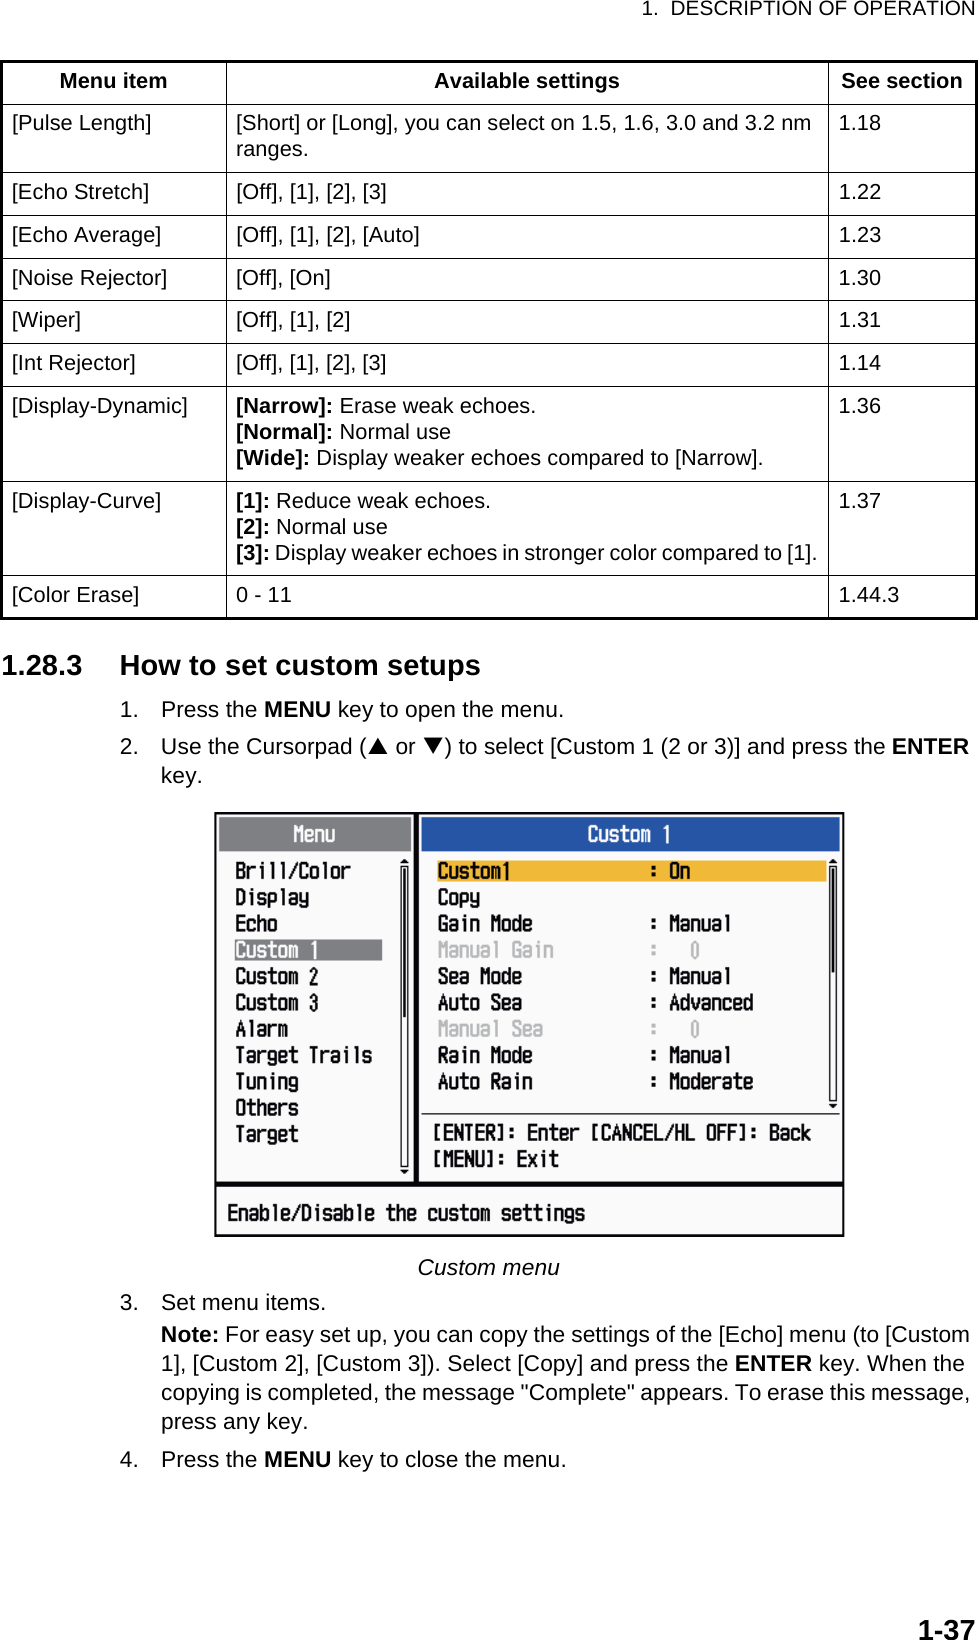 1.  DESCRIPTION OF OPERATION1-371.28.3 How to set custom setups1. Press the MENU key to open the menu.2. Use the Cursorpad (S or T) to select [Custom 1 (2 or 3)] and press the ENTER key.Custom menu3. Set menu items.Note: For easy set up, you can copy the settings of the [Echo] menu (to [Custom 1], [Custom 2], [Custom 3]). Select [Copy] and press the ENTER key. When the copying is completed, the message &quot;Complete&quot; appears. To erase this message, press any key.4. Press the MENU key to close the menu.[Pulse Length] [Short] or [Long], you can select on 1.5, 1.6, 3.0 and 3.2 nm ranges. 1.18[Echo Stretch] [Off], [1], [2], [3] 1.22[Echo Average] [Off], [1], [2], [Auto] 1.23[Noise Rejector] [Off], [On] 1.30[Wiper] [Off], [1], [2] 1.31[Int Rejector] [Off], [1], [2], [3] 1.14[Display-Dynamic] [Narrow]: Erase weak echoes.[Normal]: Normal use[Wide]: Display weaker echoes compared to [Narrow].1.36[Display-Curve] [1]: Reduce weak echoes.[2]: Normal use[3]: Display weaker echoes in stronger color compared to [1].1.37[Color Erase] 0 - 11 1.44.3Menu item Available settings See section